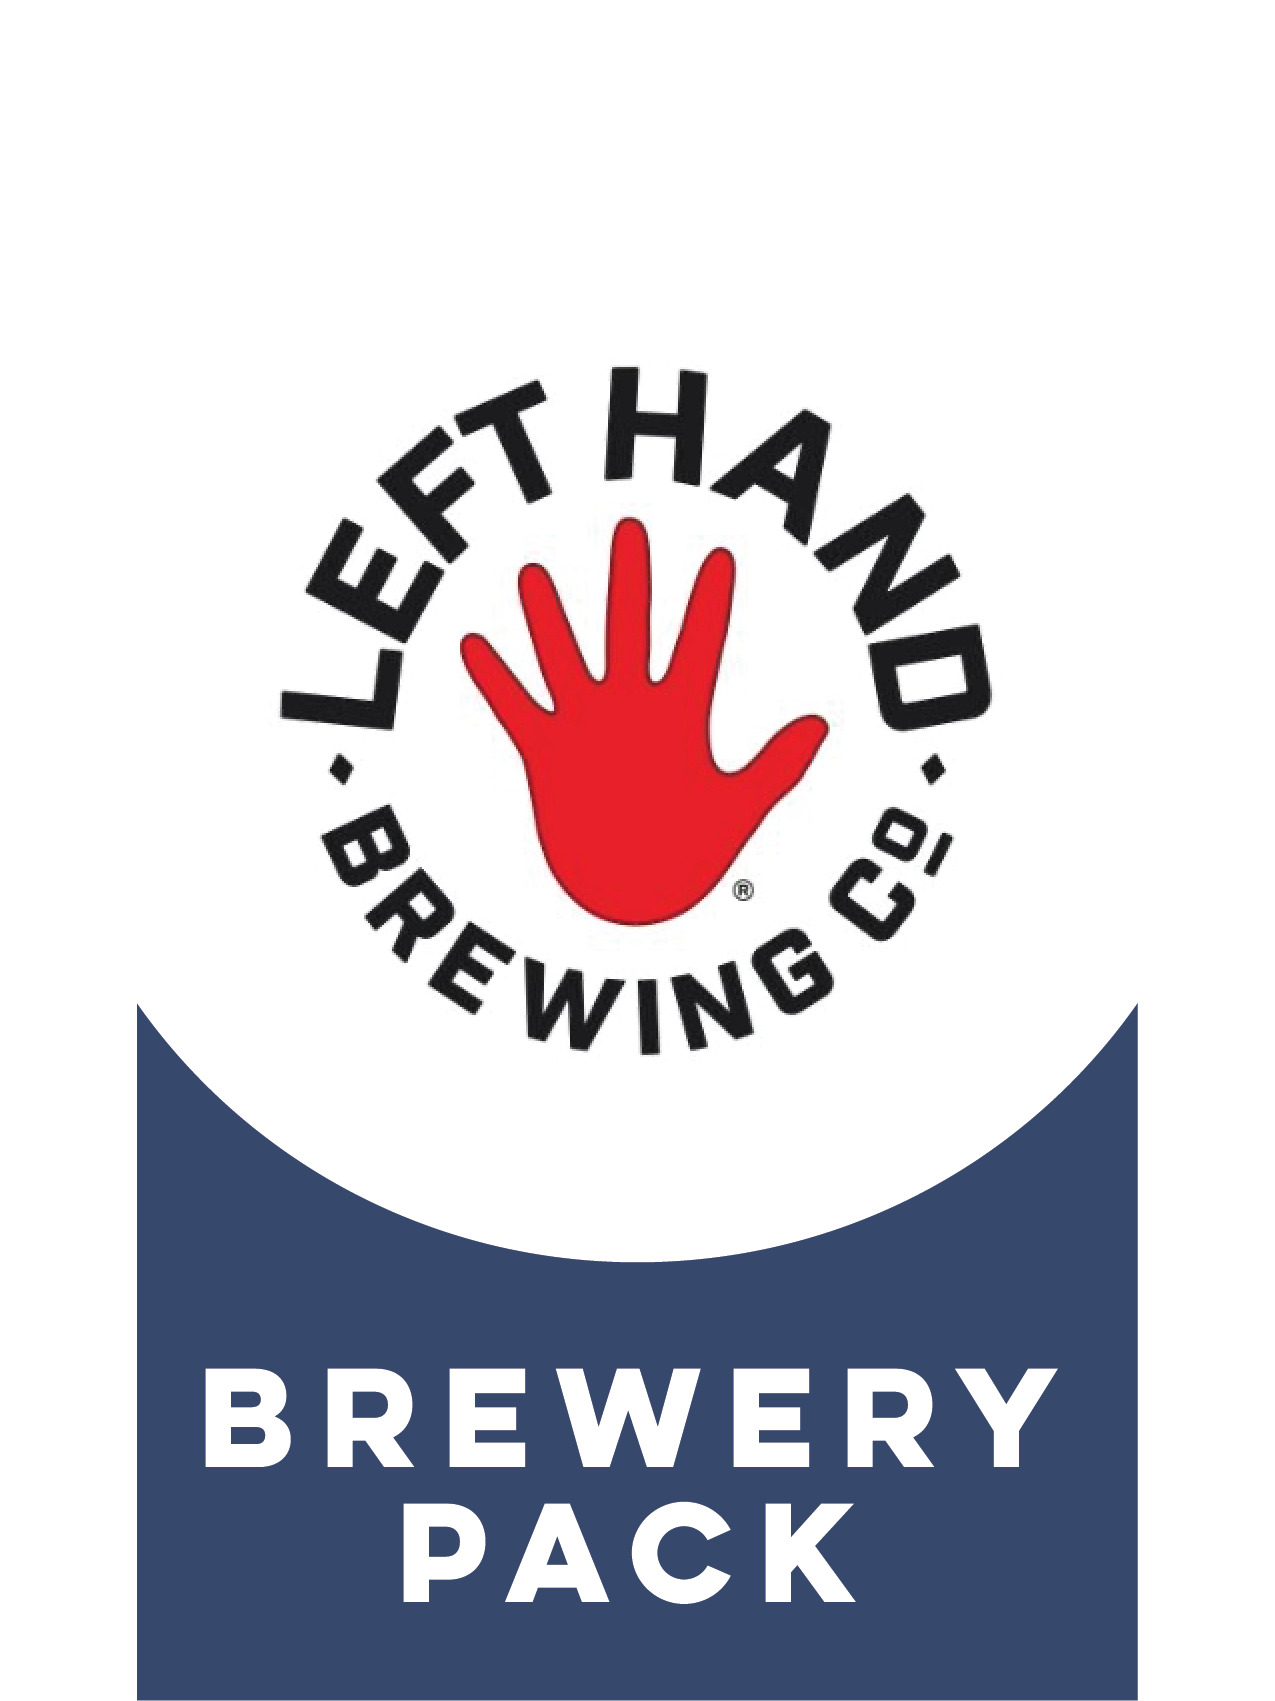 -Left Hand- Left Hand Brewery Pack-Packs & Cases- Only @ Beer Republic - The best online beer store for American & Canadian craft beer - Buy beer online from the USA and Canada - Bier online kopen - Amerikaans bier kopen - Craft beer store - Craft beer kopen - Amerikanisch bier kaufen - Bier online kaufen - Acheter biere online - IPA - Stout - Porter - New England IPA - Hazy IPA - Imperial Stout - Barrel Aged - Barrel Aged Imperial Stout - Brown - Dark beer - Blond - Blonde - Pilsner - Lager - Wheat - Weize